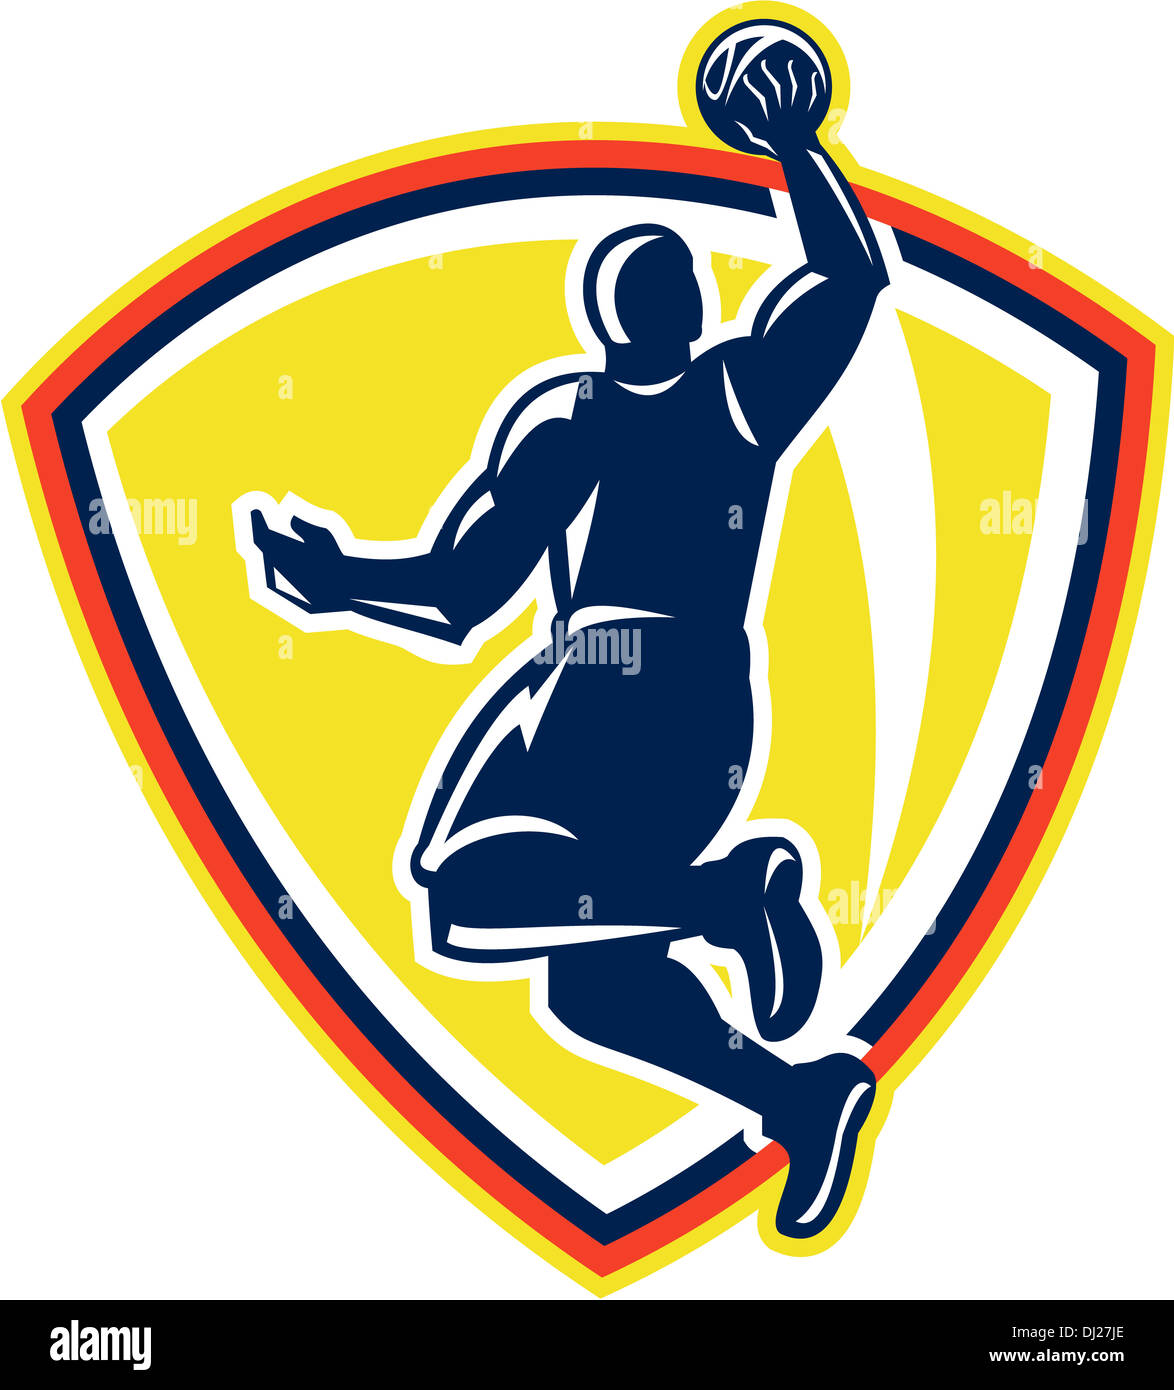 Illustration of a basketball player dunking rebounding lay up ball set inside shield crest done in retro style. Stock Photo